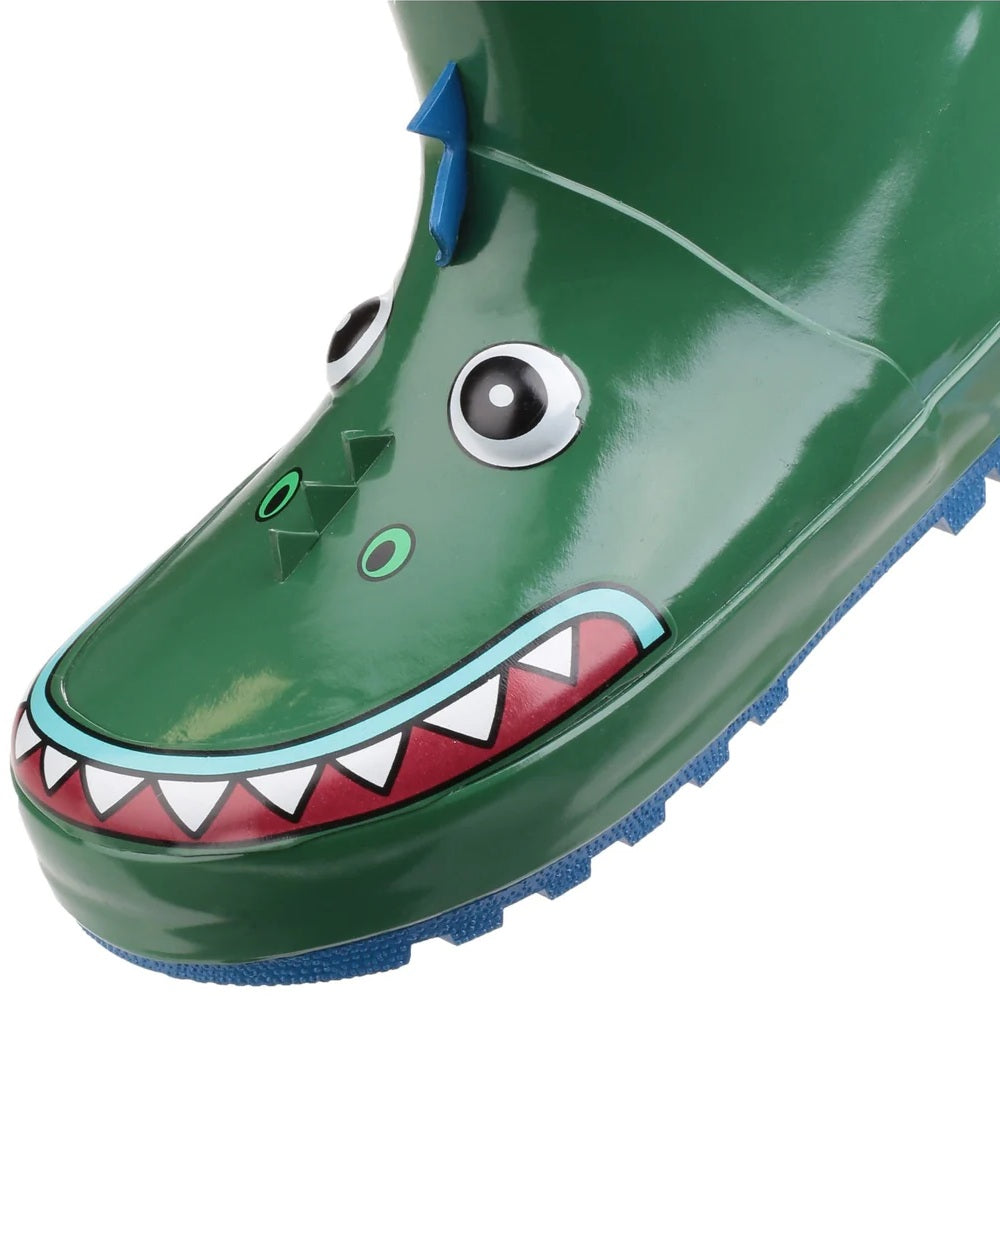 Wotswold Childrens Puddle Waterproof Pull On Boots in Crocodile 